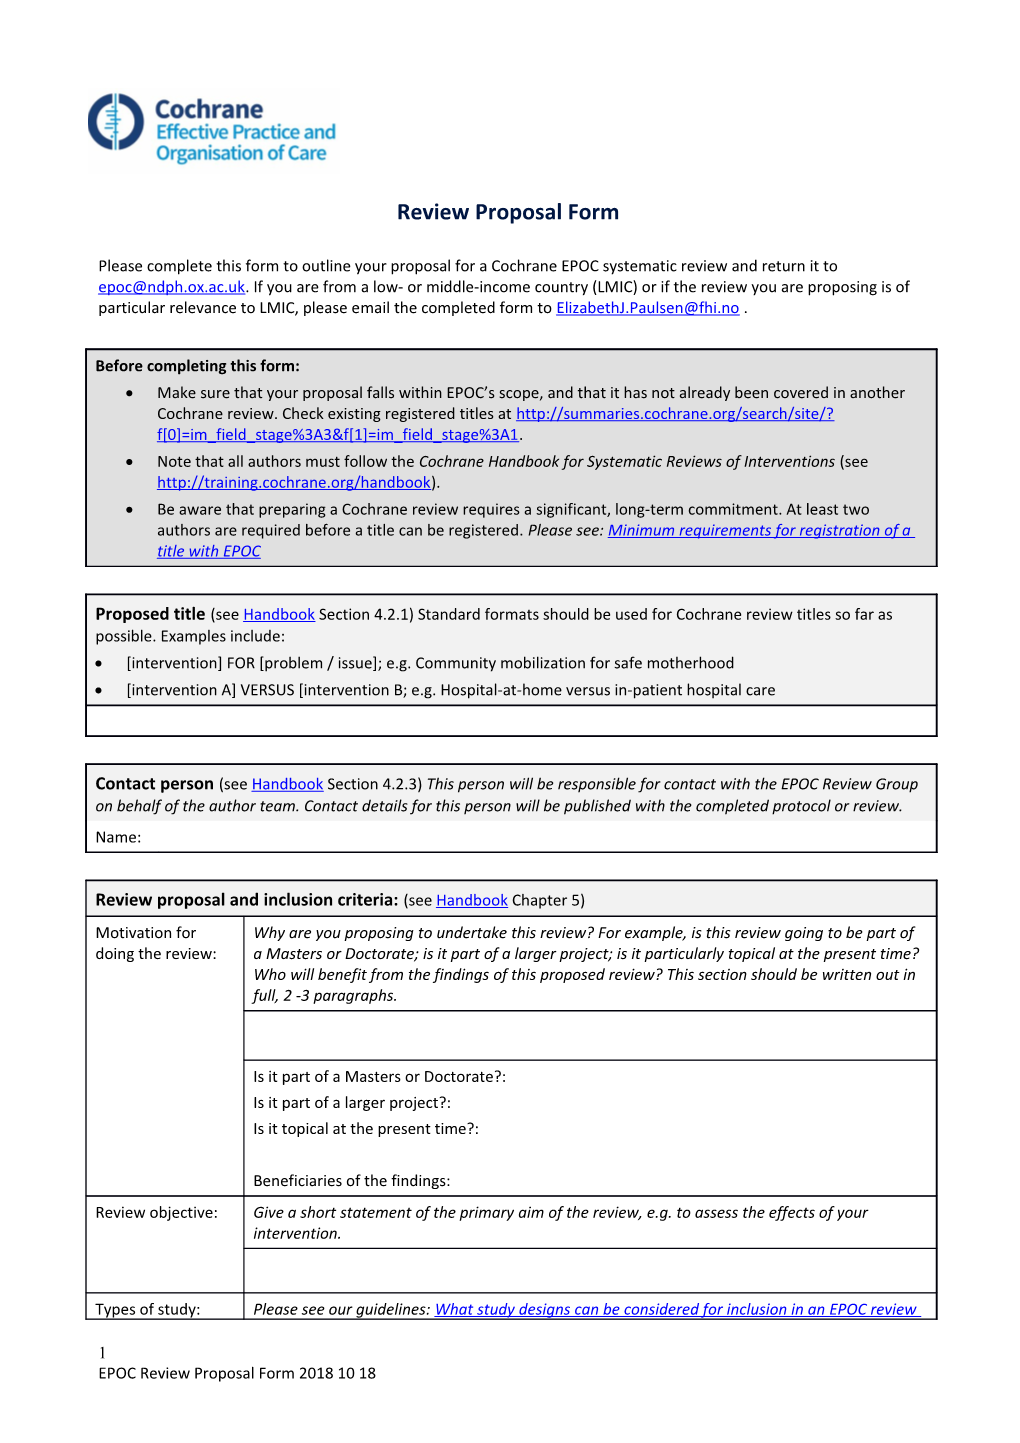 Review Proposal Form